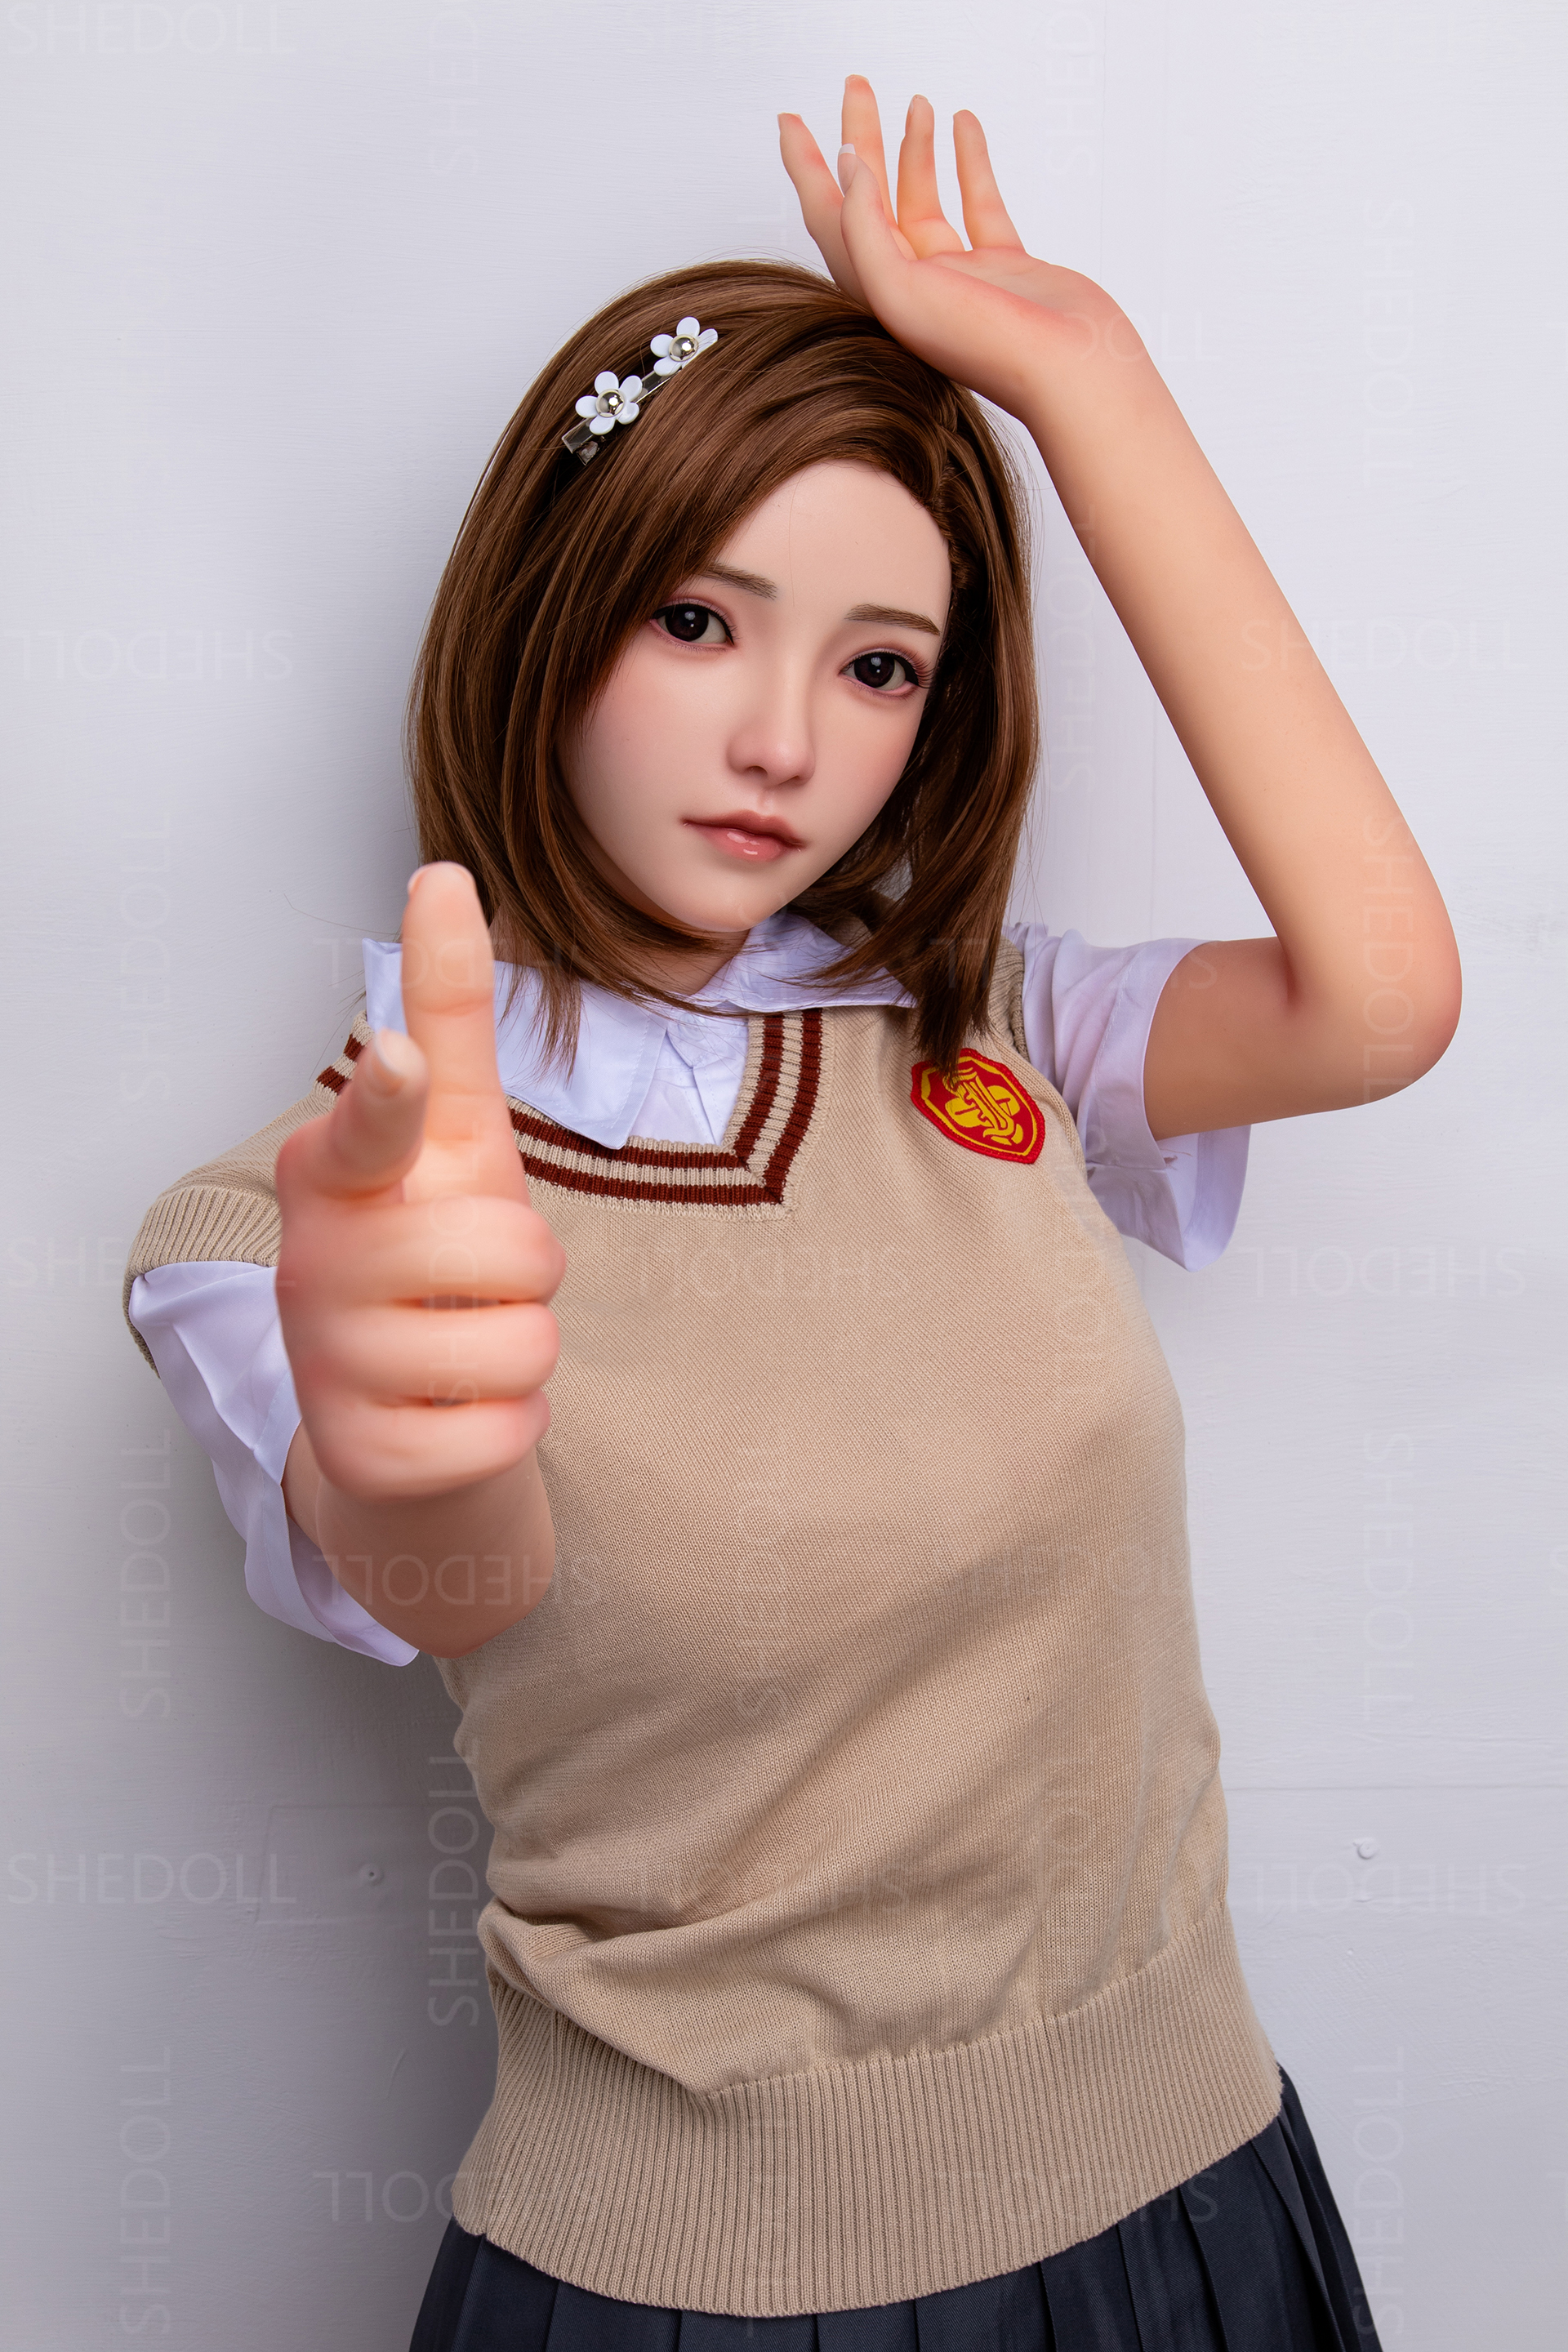 SHEDOLL | Rose-5ft5/165cm ROS silicone head Sex Doll